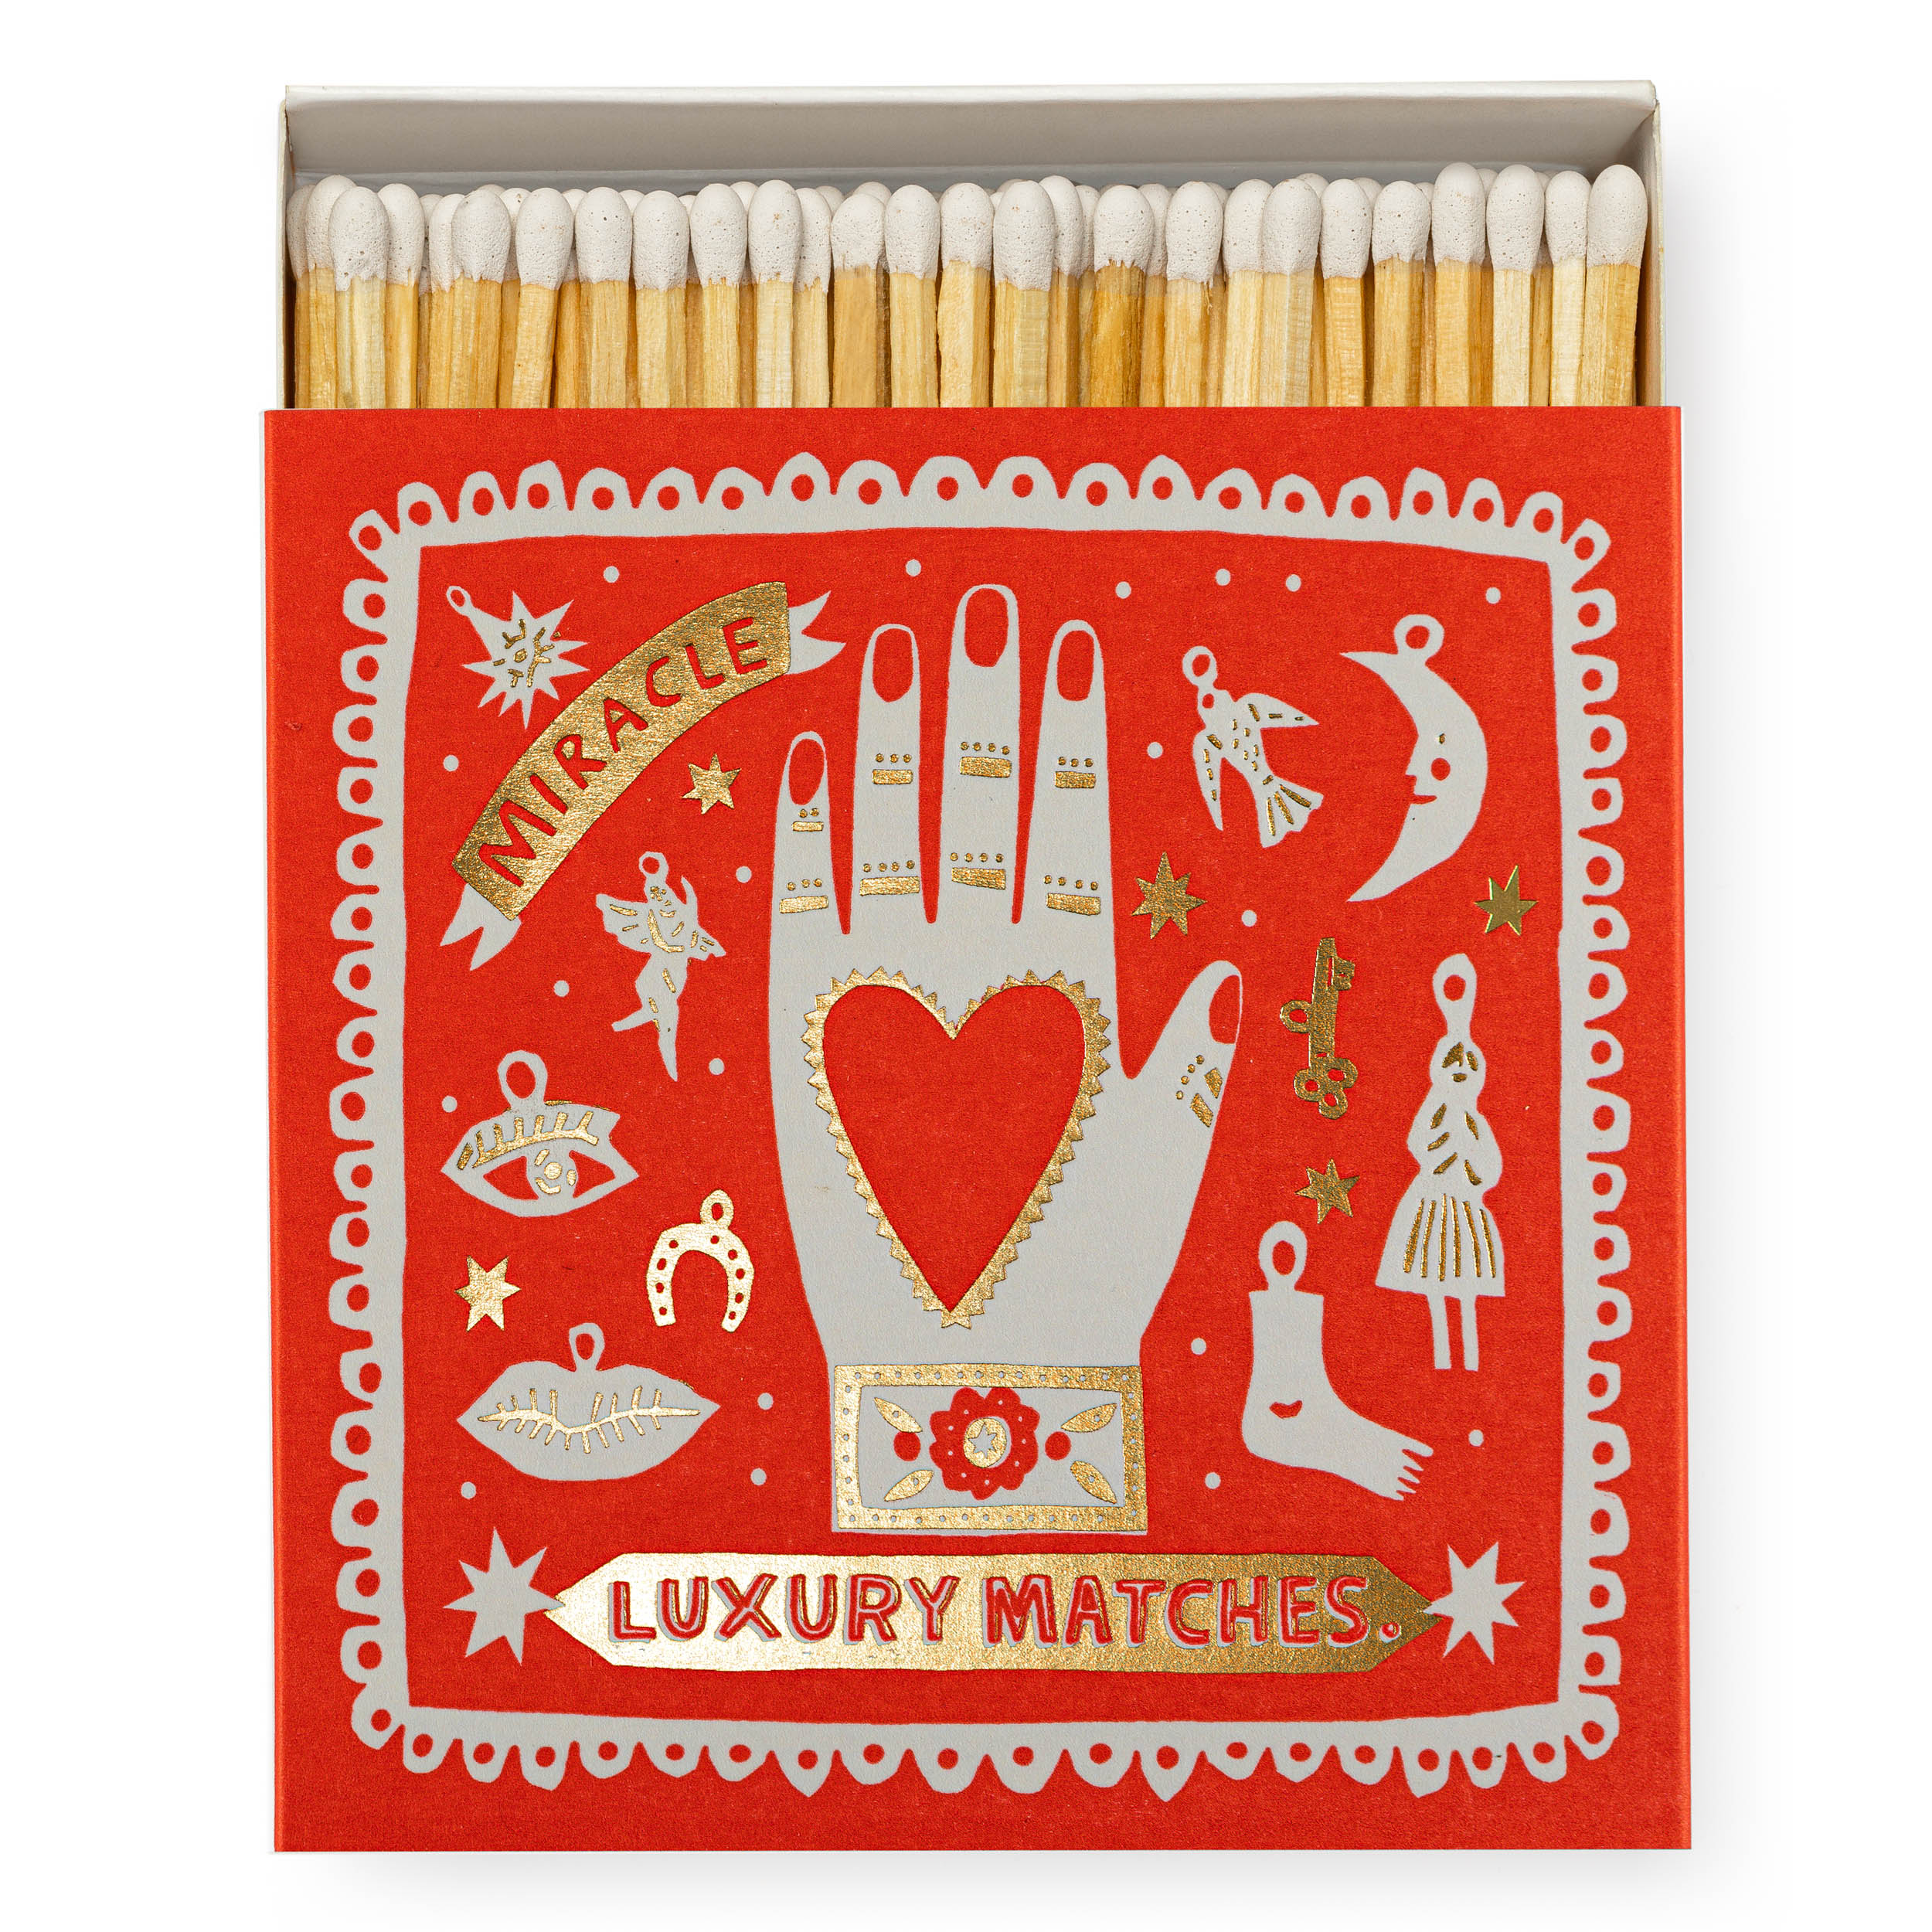 Miracle Luxury Matches - Square Matchboxes - The Printed Peanut - from Archivist Gallery 